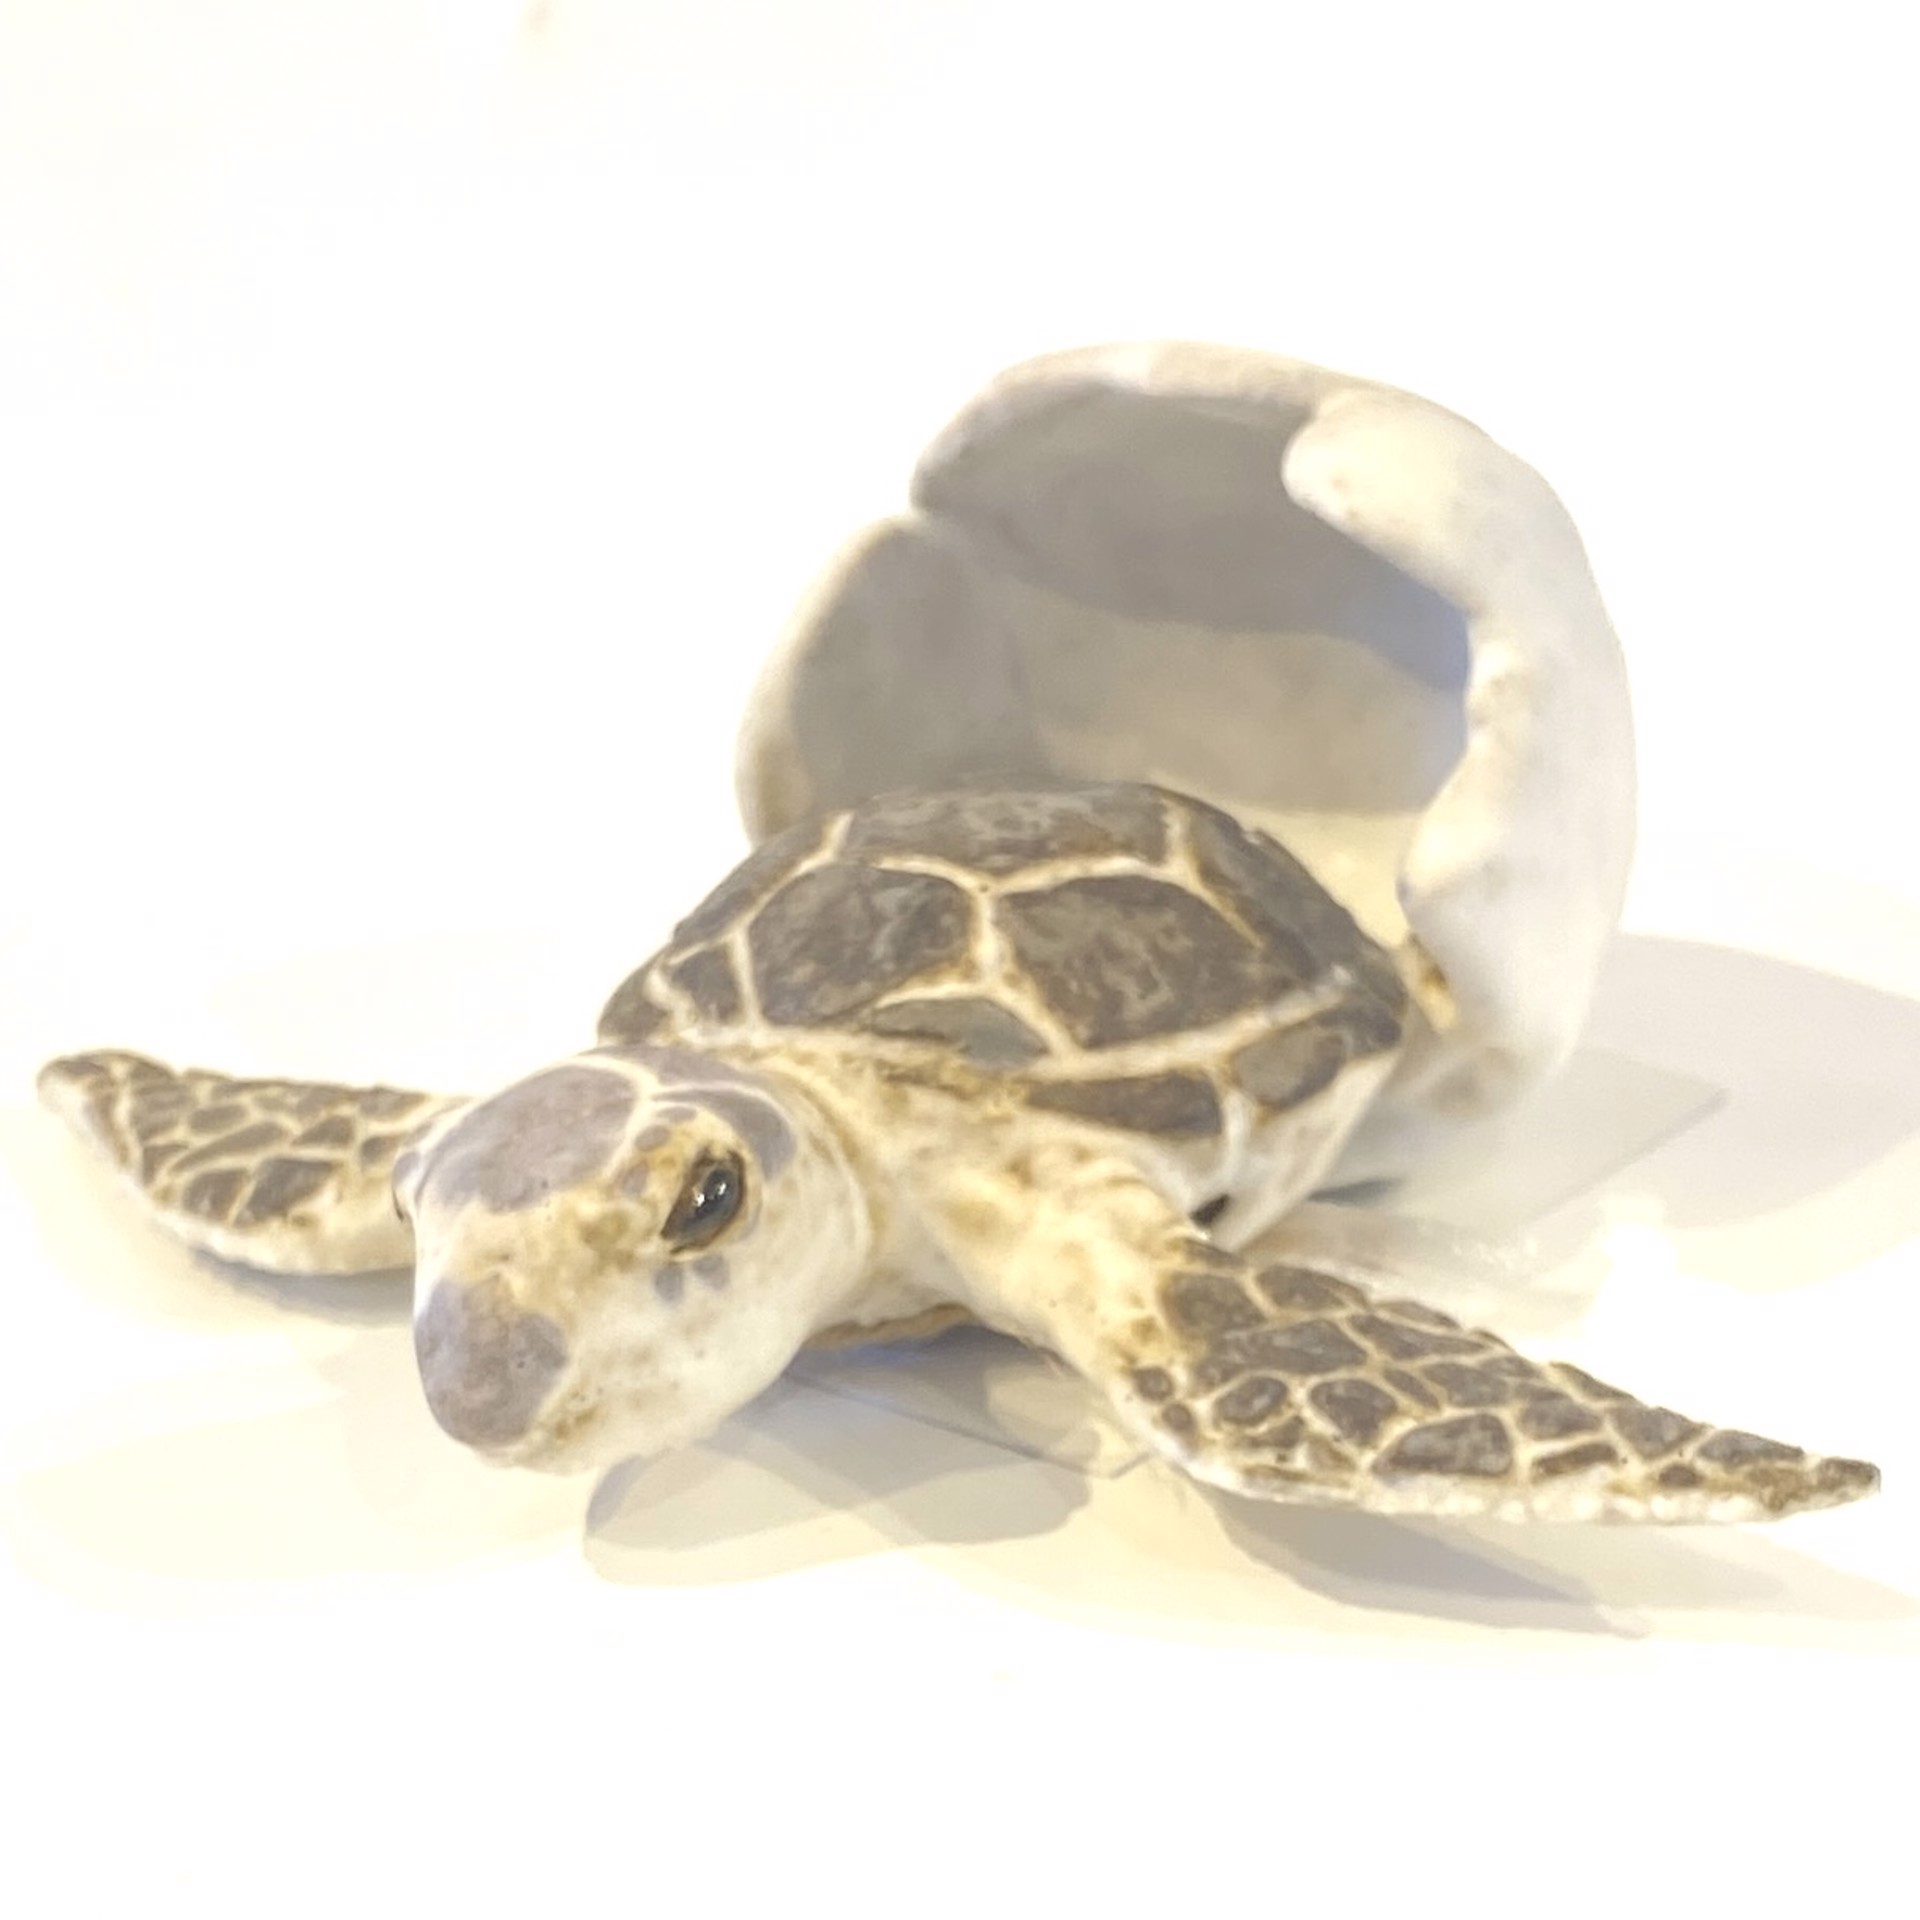 Atlantic Green Turtle Hatchling with Shell SG23-59 by Shayne Greco